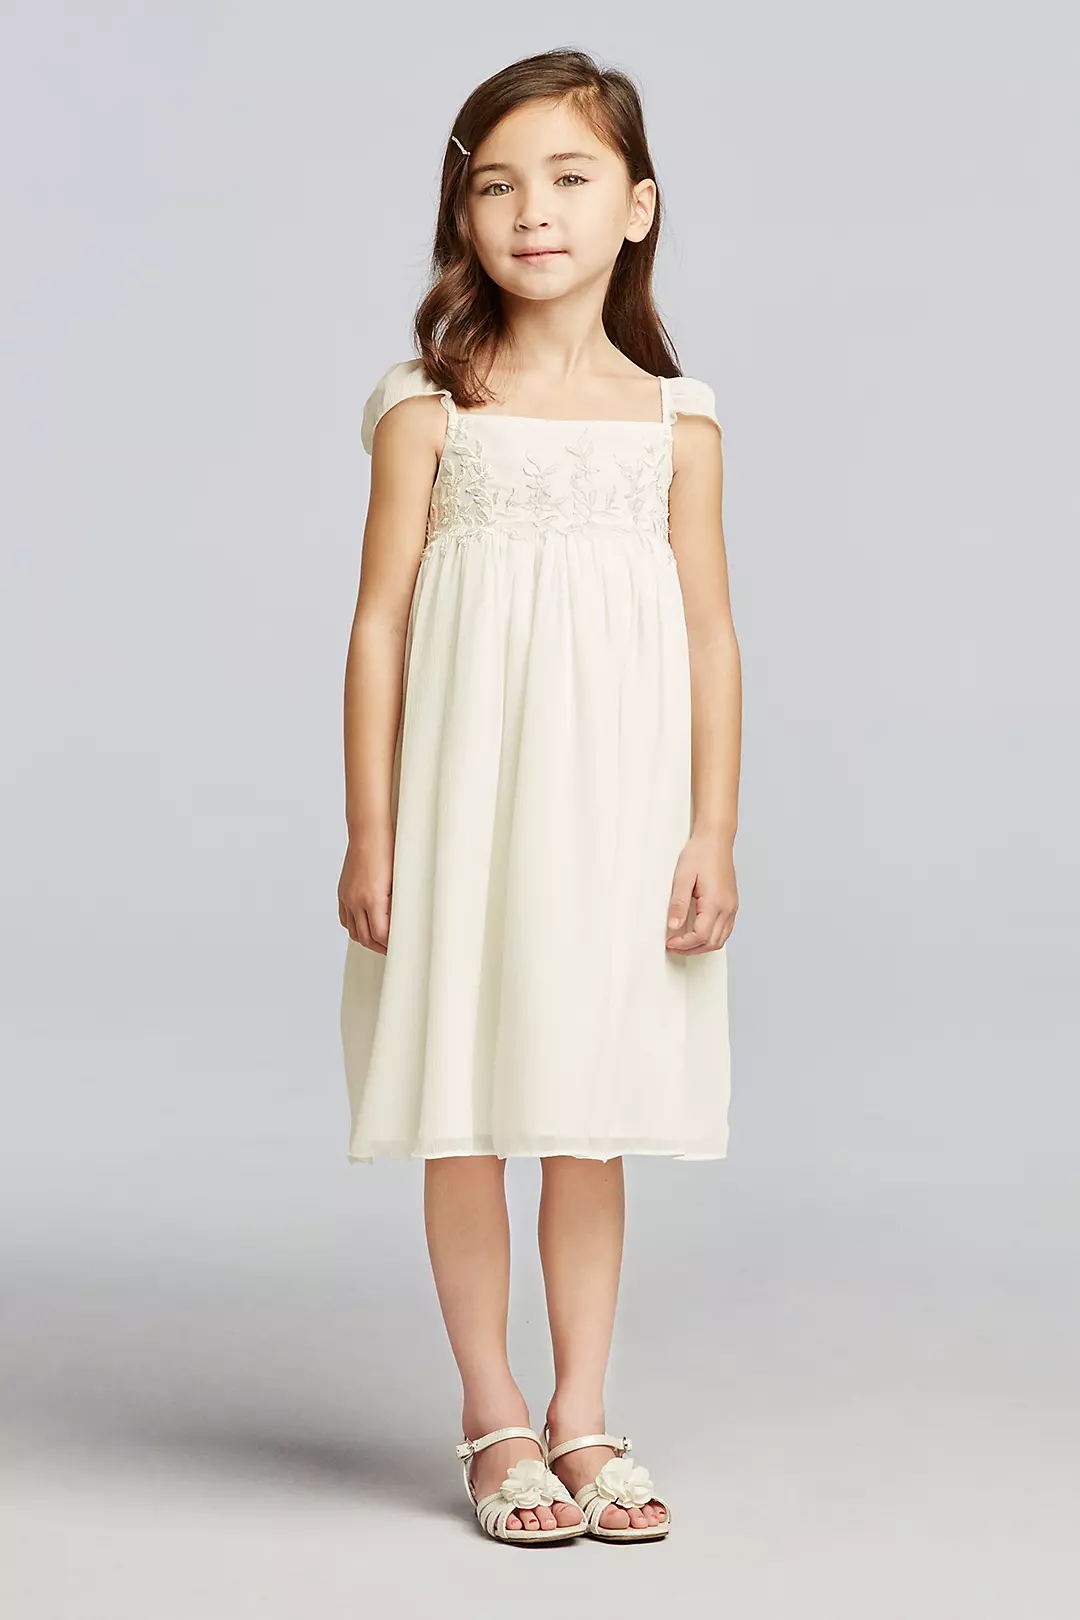 Chiffon Flower Girl Dress with Cap Sleeves Image